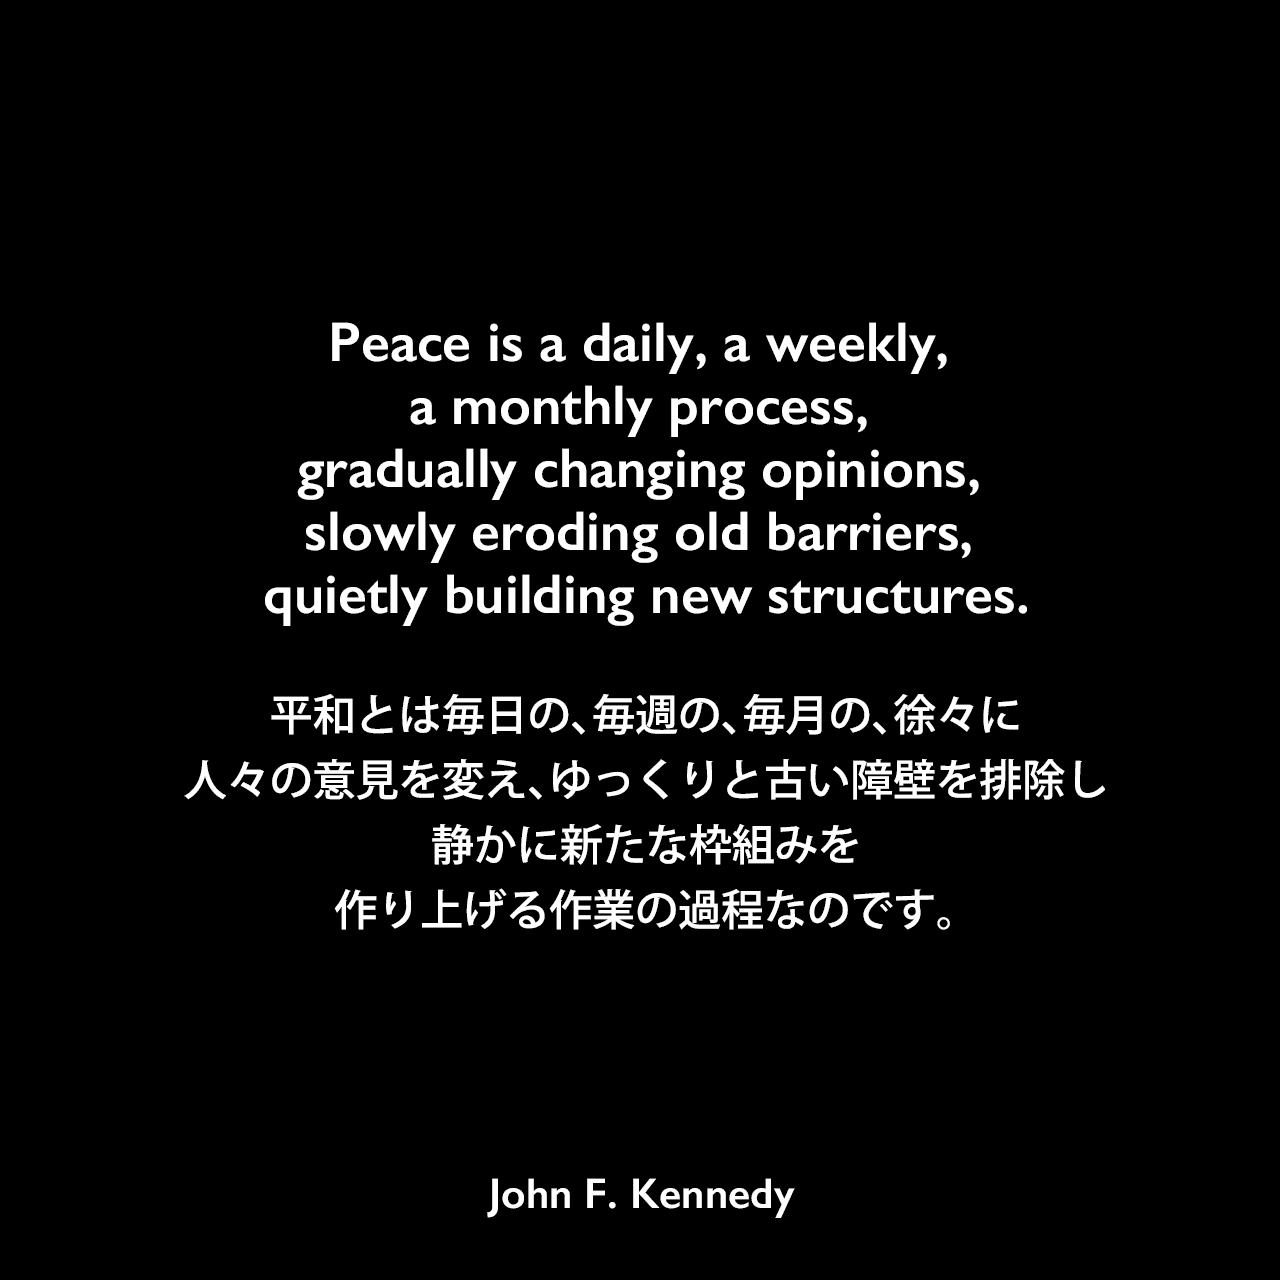 Peace is a daily, a weekly, a monthly process, gradually changing opinions, slowly eroding old barriers, quietly building new structures.平和とは毎日の、毎週の、毎月の、徐々に人々の意見を変え、ゆっくりと古い障壁を排除し、静かに新たな枠組みを作り上げる作業の過程なのです。- 1963年の国連総会前の演説よりJohn F Kennedy